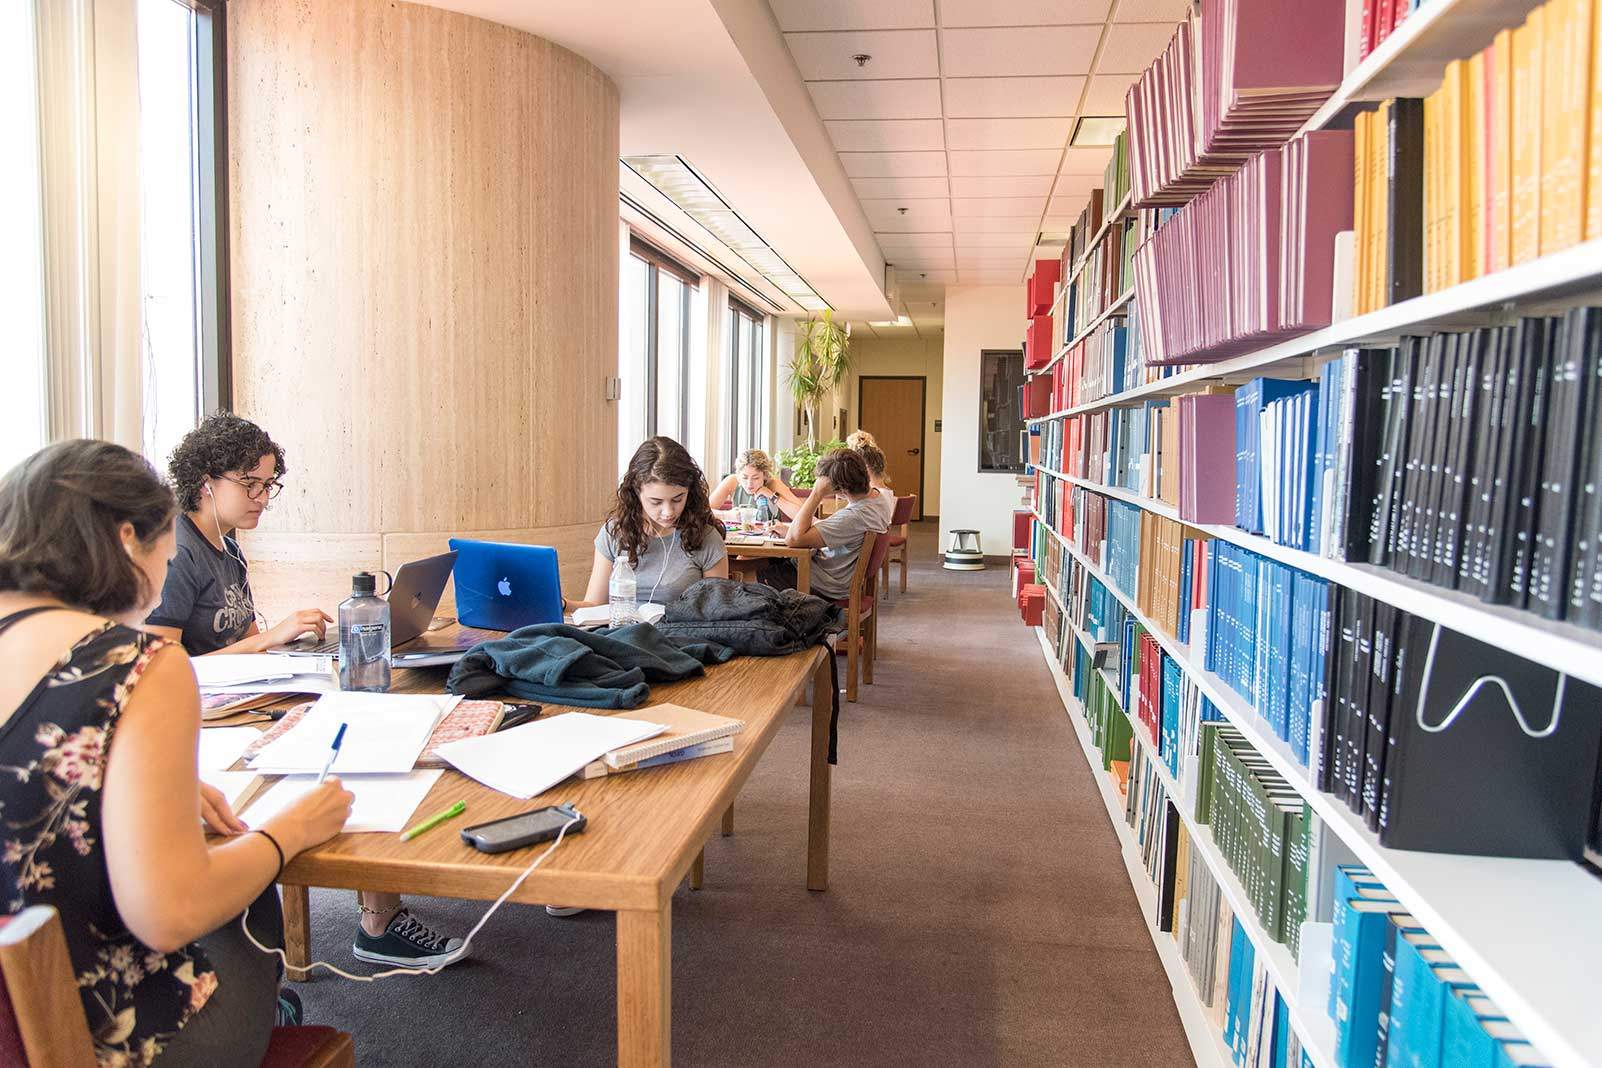 female students study at a table beside a colorful book shelf